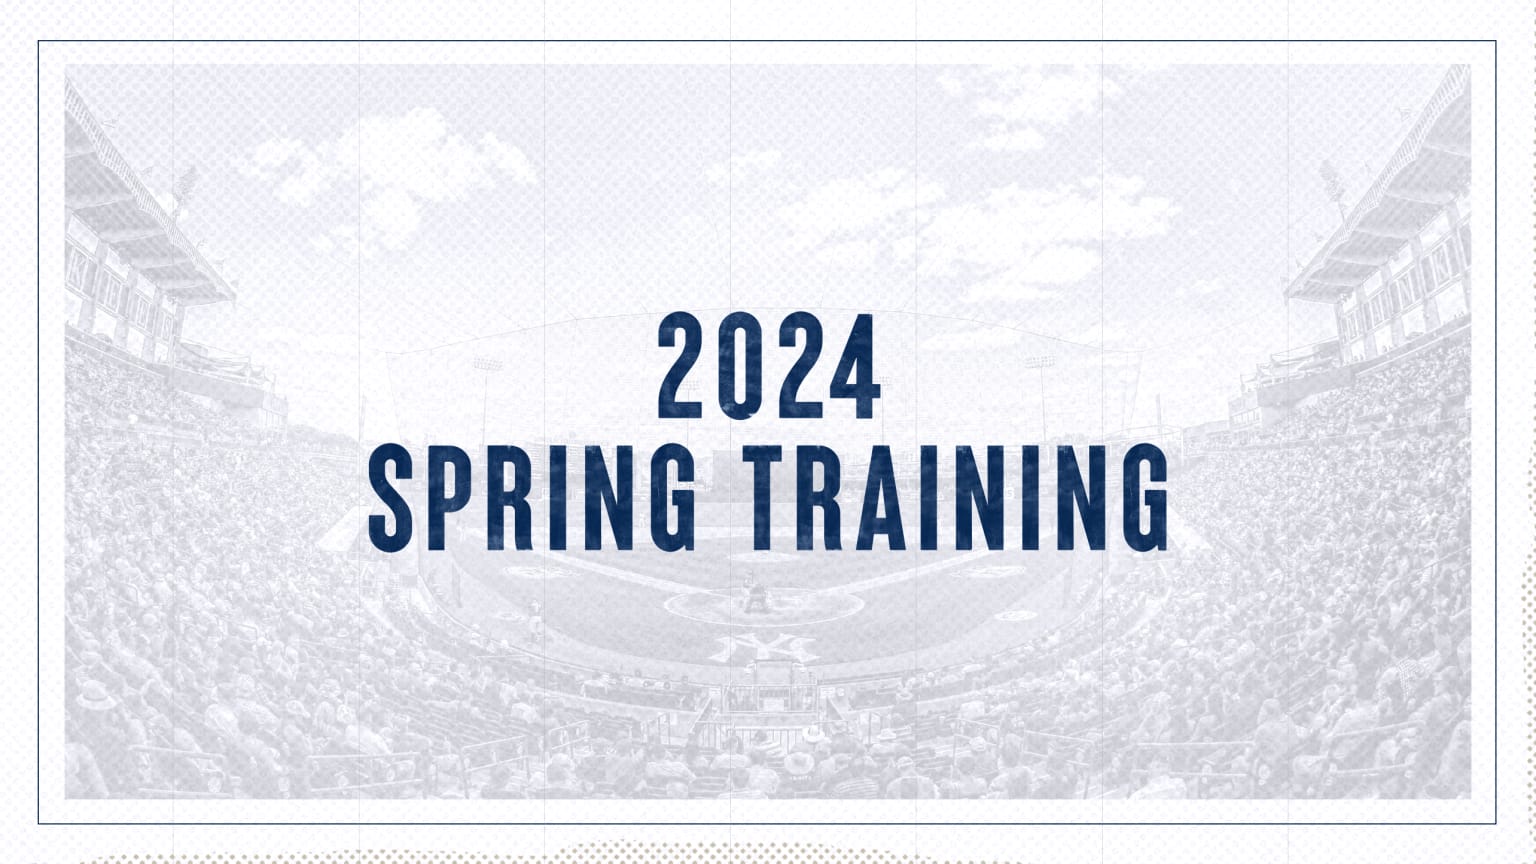 MLB spring training 2023: Schedule for every club's first game